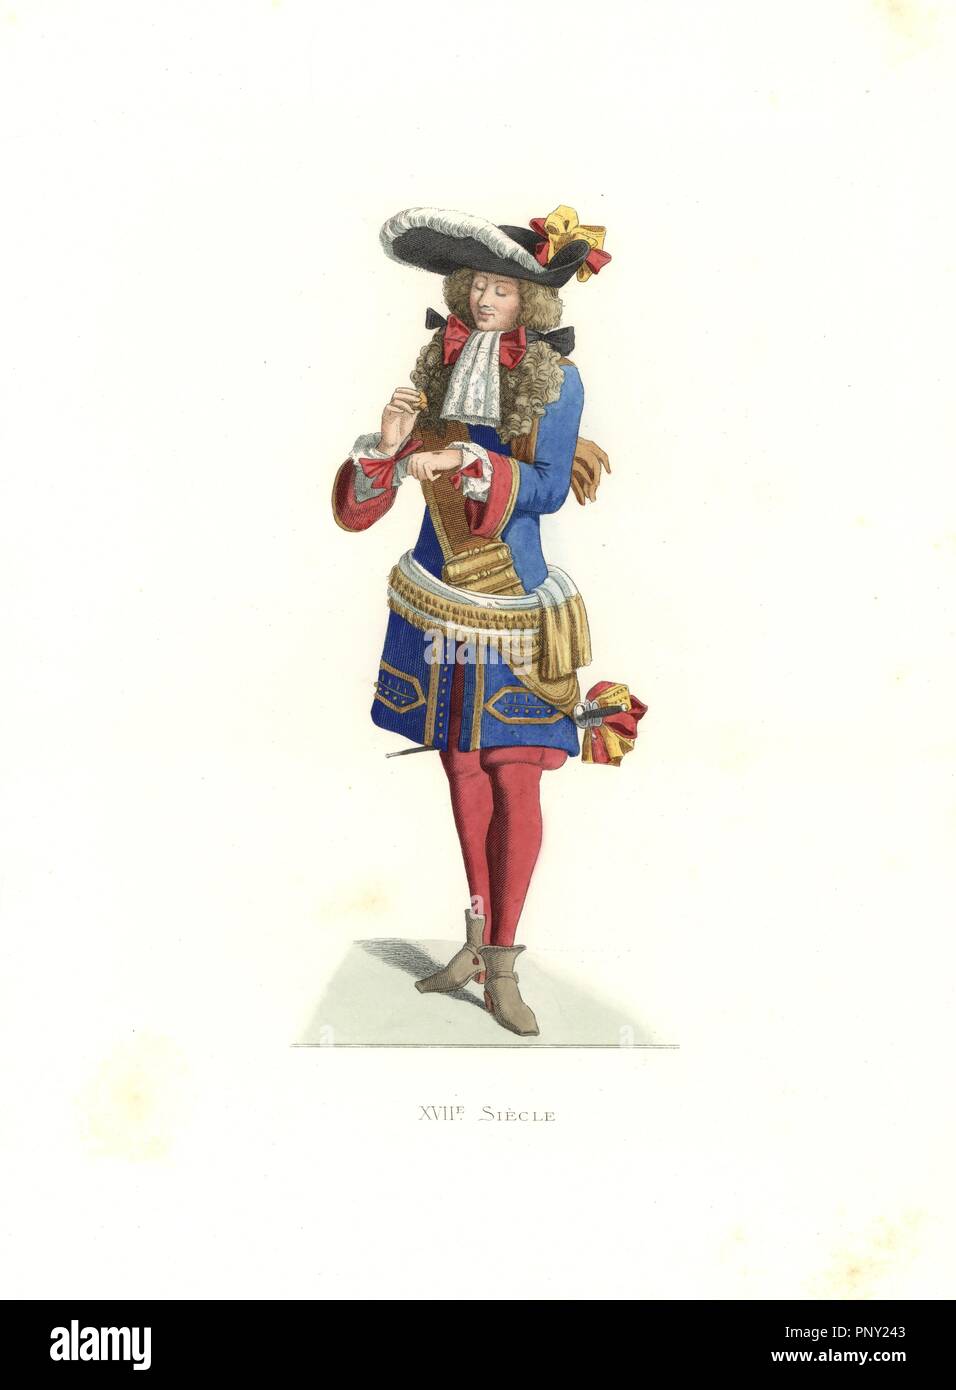 Royal officer, France, 17th century, from a print by Jean de Saint-Jean, 1675. Handcolored illustration by E. Lechevallier-Chevignard, lithographed by A. Didier, L. Flameng, F. Laguillermie, from Georges Duplessis's 'Costumes historiques des XVIe, XVIIe et XVIIIe siecles' (Historical costumes of the 16th, 17th and 18th centuries), Paris 1867. The book was a continuation of the series on the costumes of the 12th to 15th centuries published by Camille Bonnard and Paul Mercuri from 1830. Georges Duplessis (1834-1899) was curator of the Prints department at the Bibliotheque nationale. Edmond Leche Stock Photo